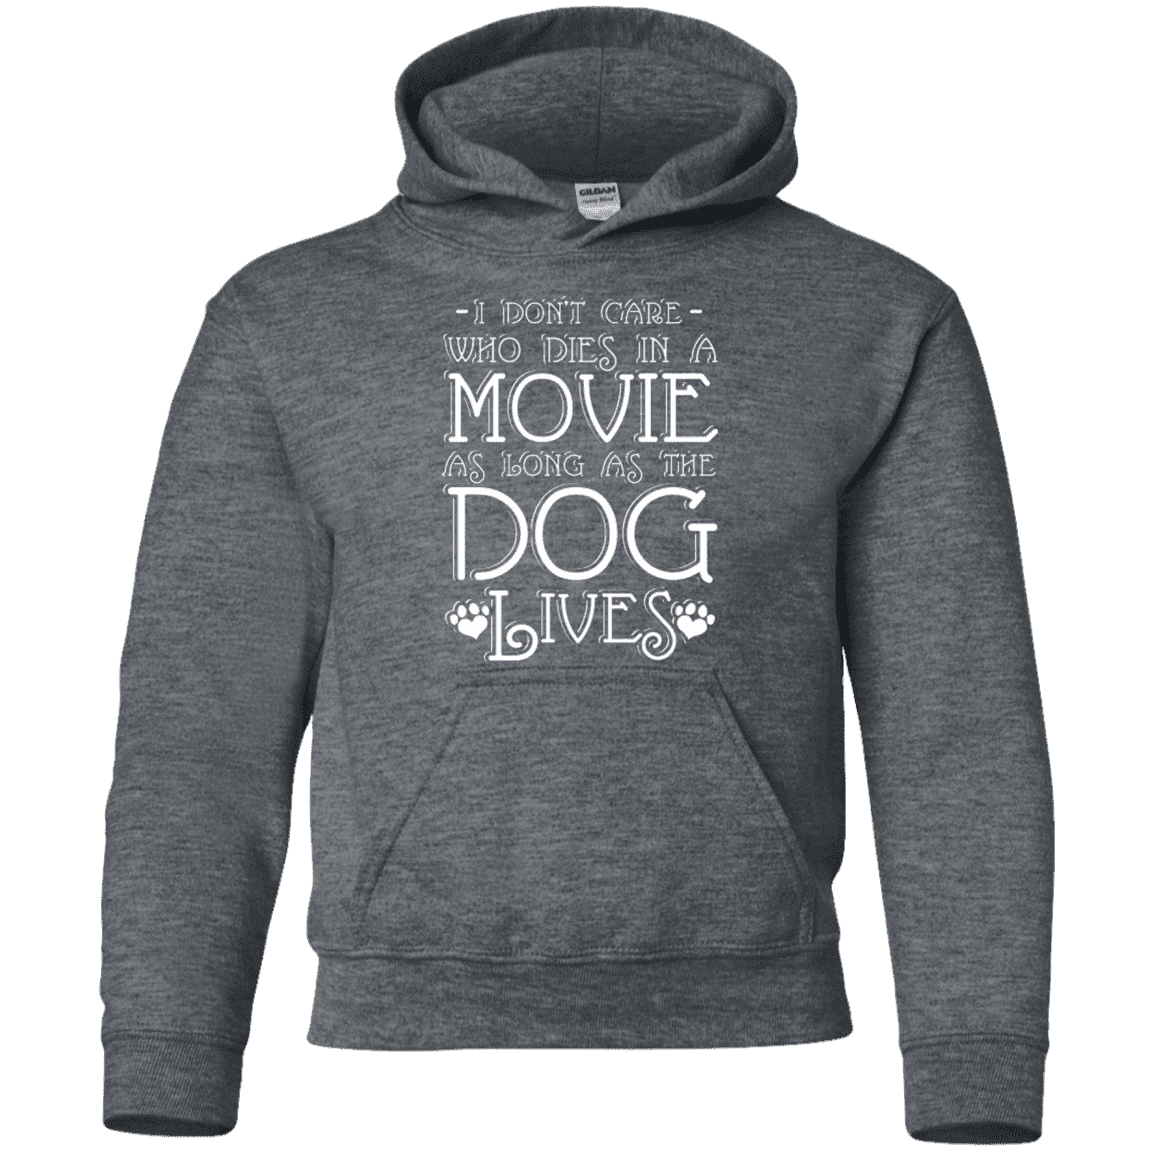 I Don't Care Who Dies In A Movie - Youth Hoodie.